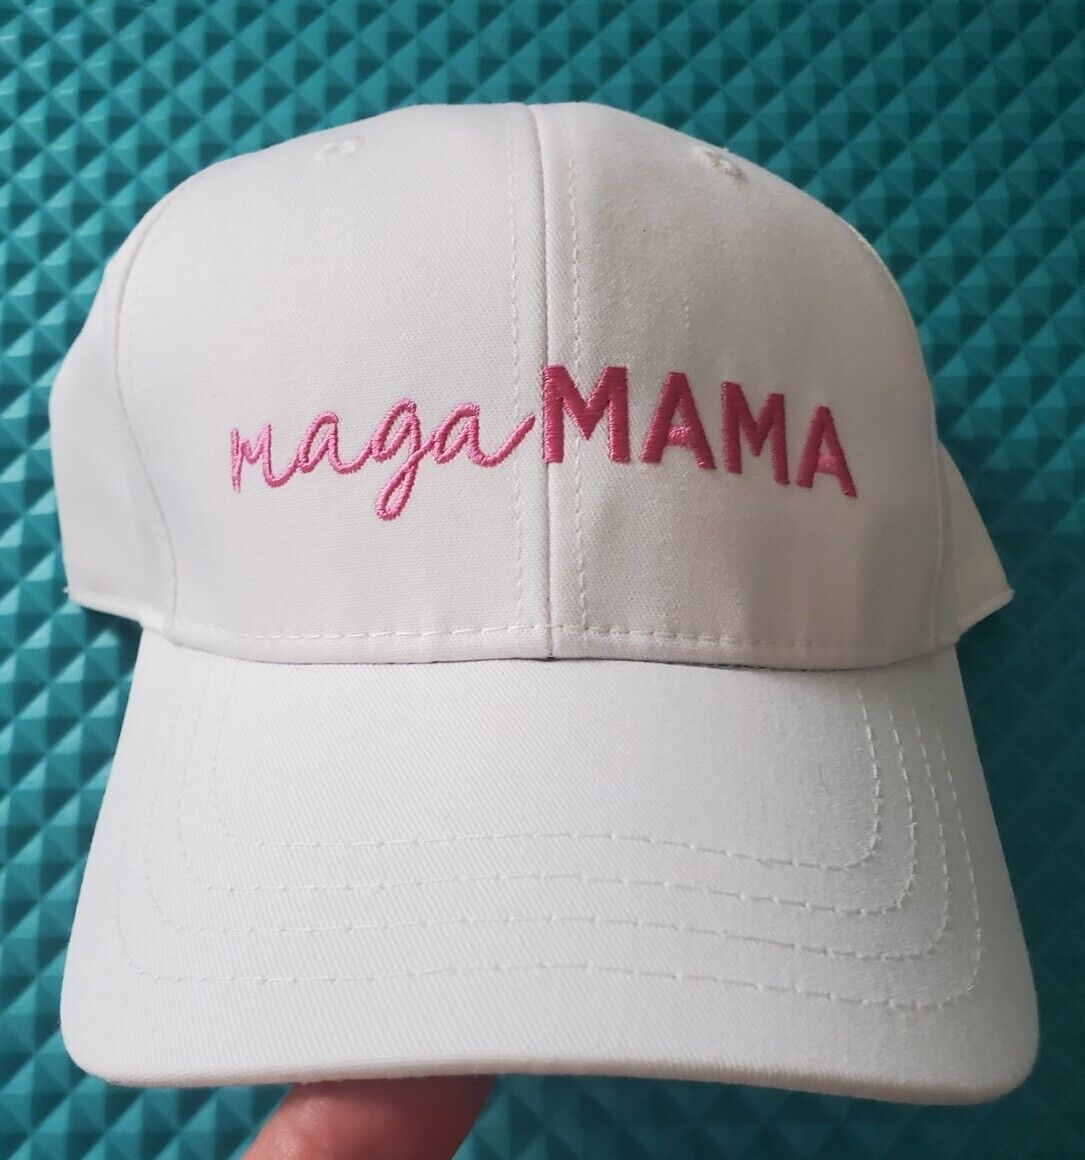 Mother Day Gift - Pres. TRUMP OFFICIAL HAT MAGA MAMA WHITE & PINK NEW RARE